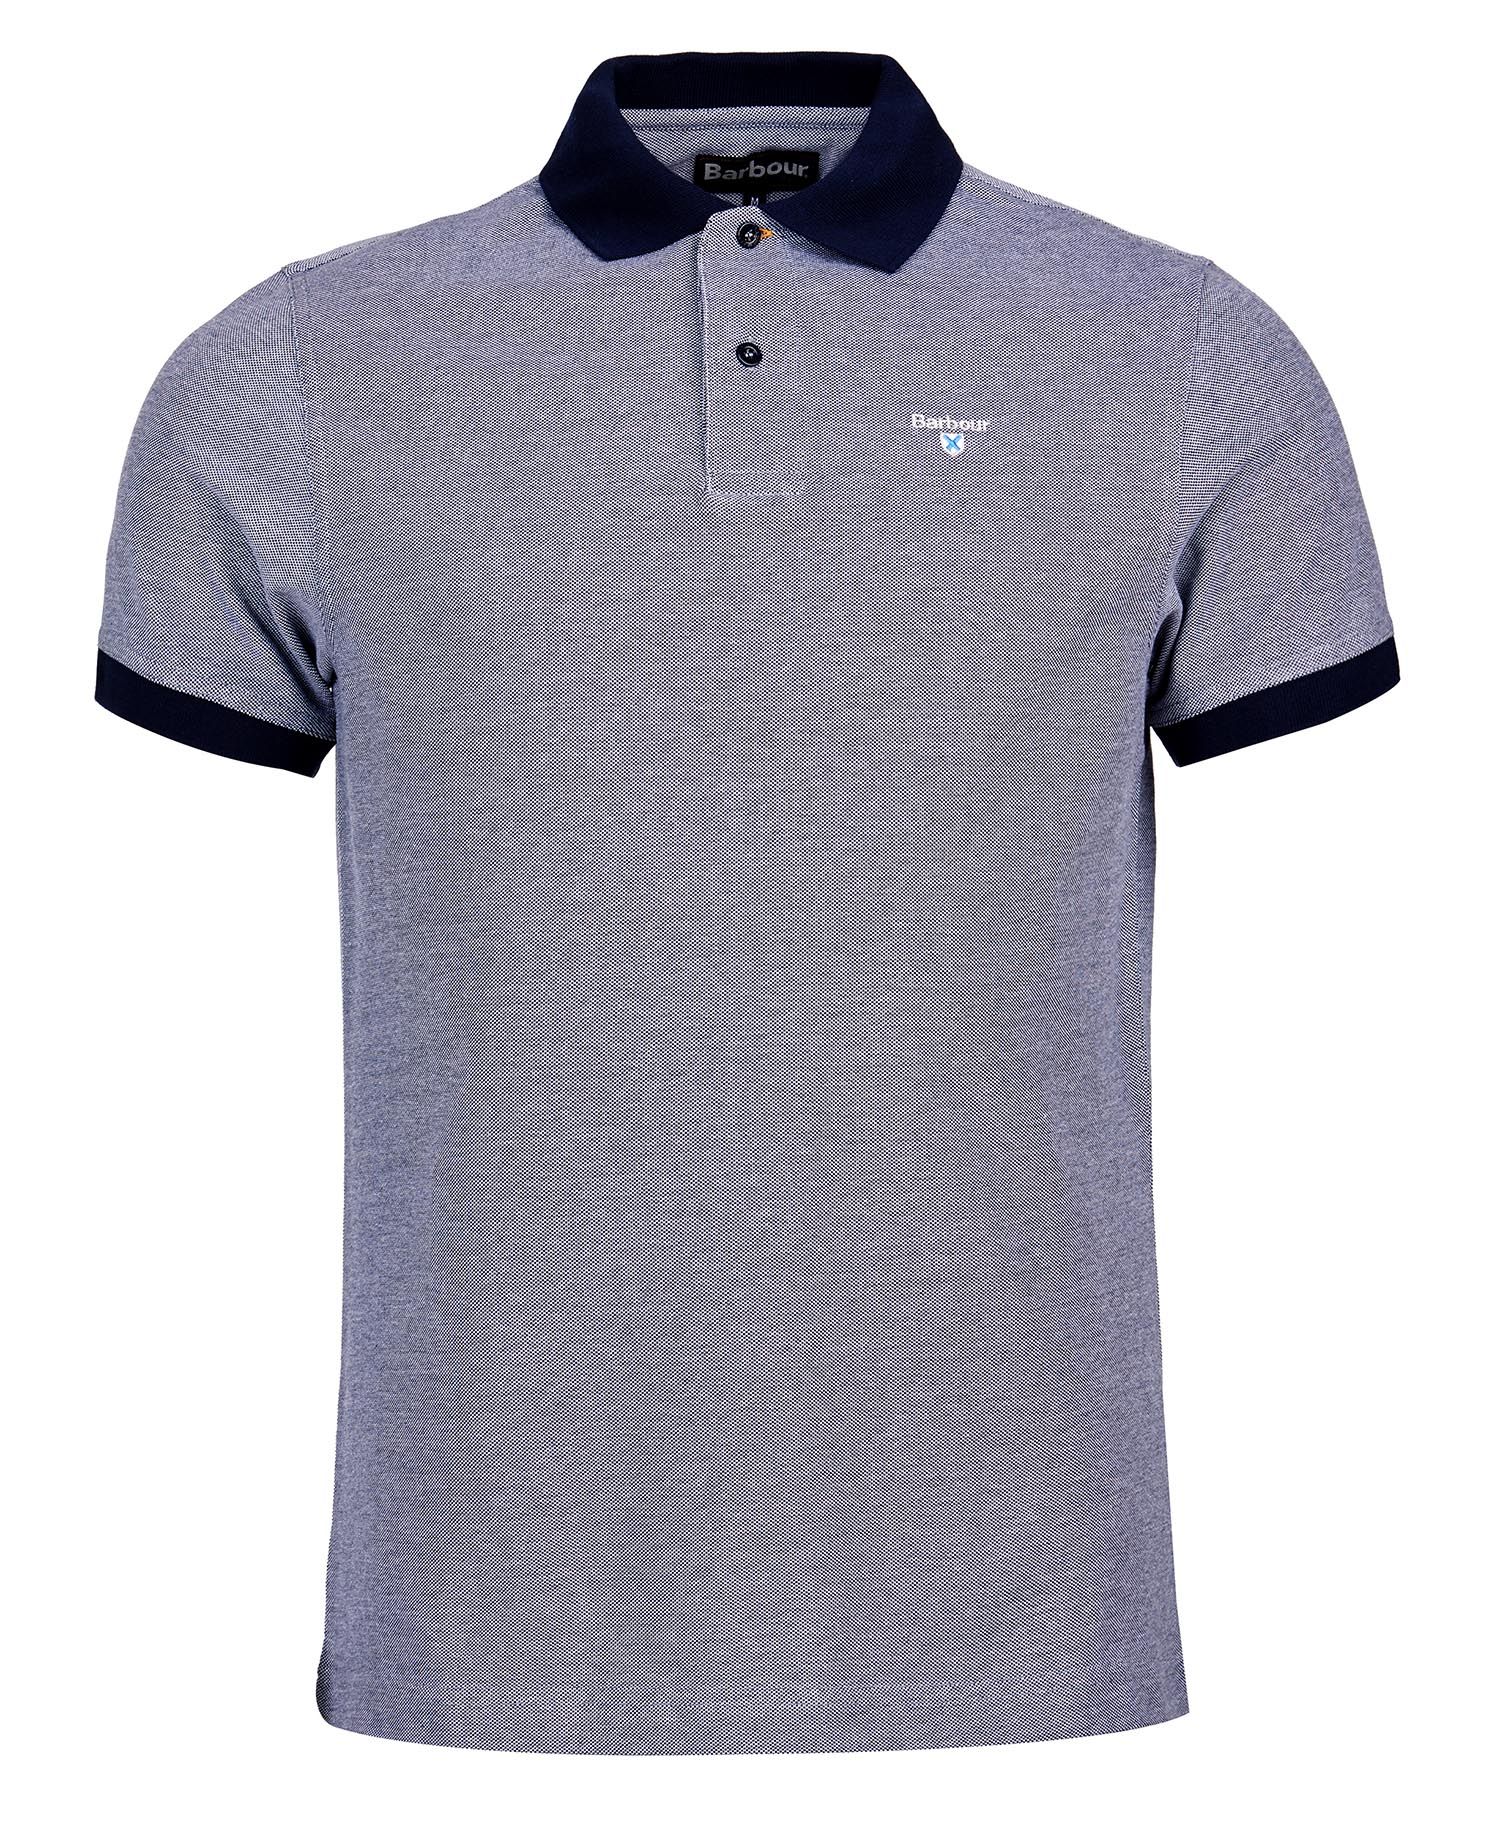 Barbour Sports Polo Mix in Blue | Barbour